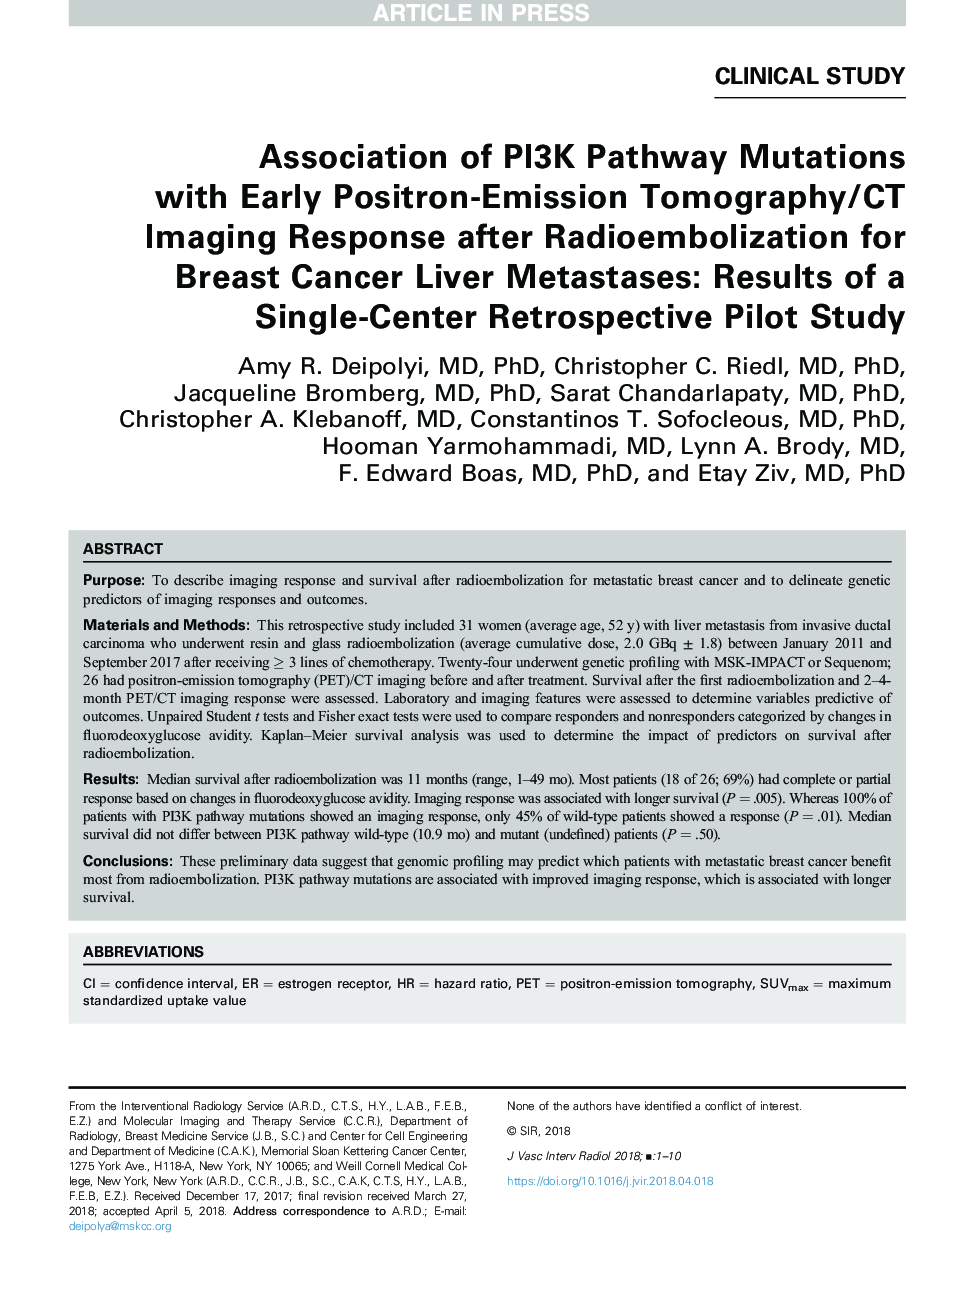 Association of PI3K Pathway Mutations with Early Positron-Emission Tomography/CT Imaging Response after Radioembolization for Breast Cancer Liver Metastases: Results of a Single-Center Retrospective Pilot Study